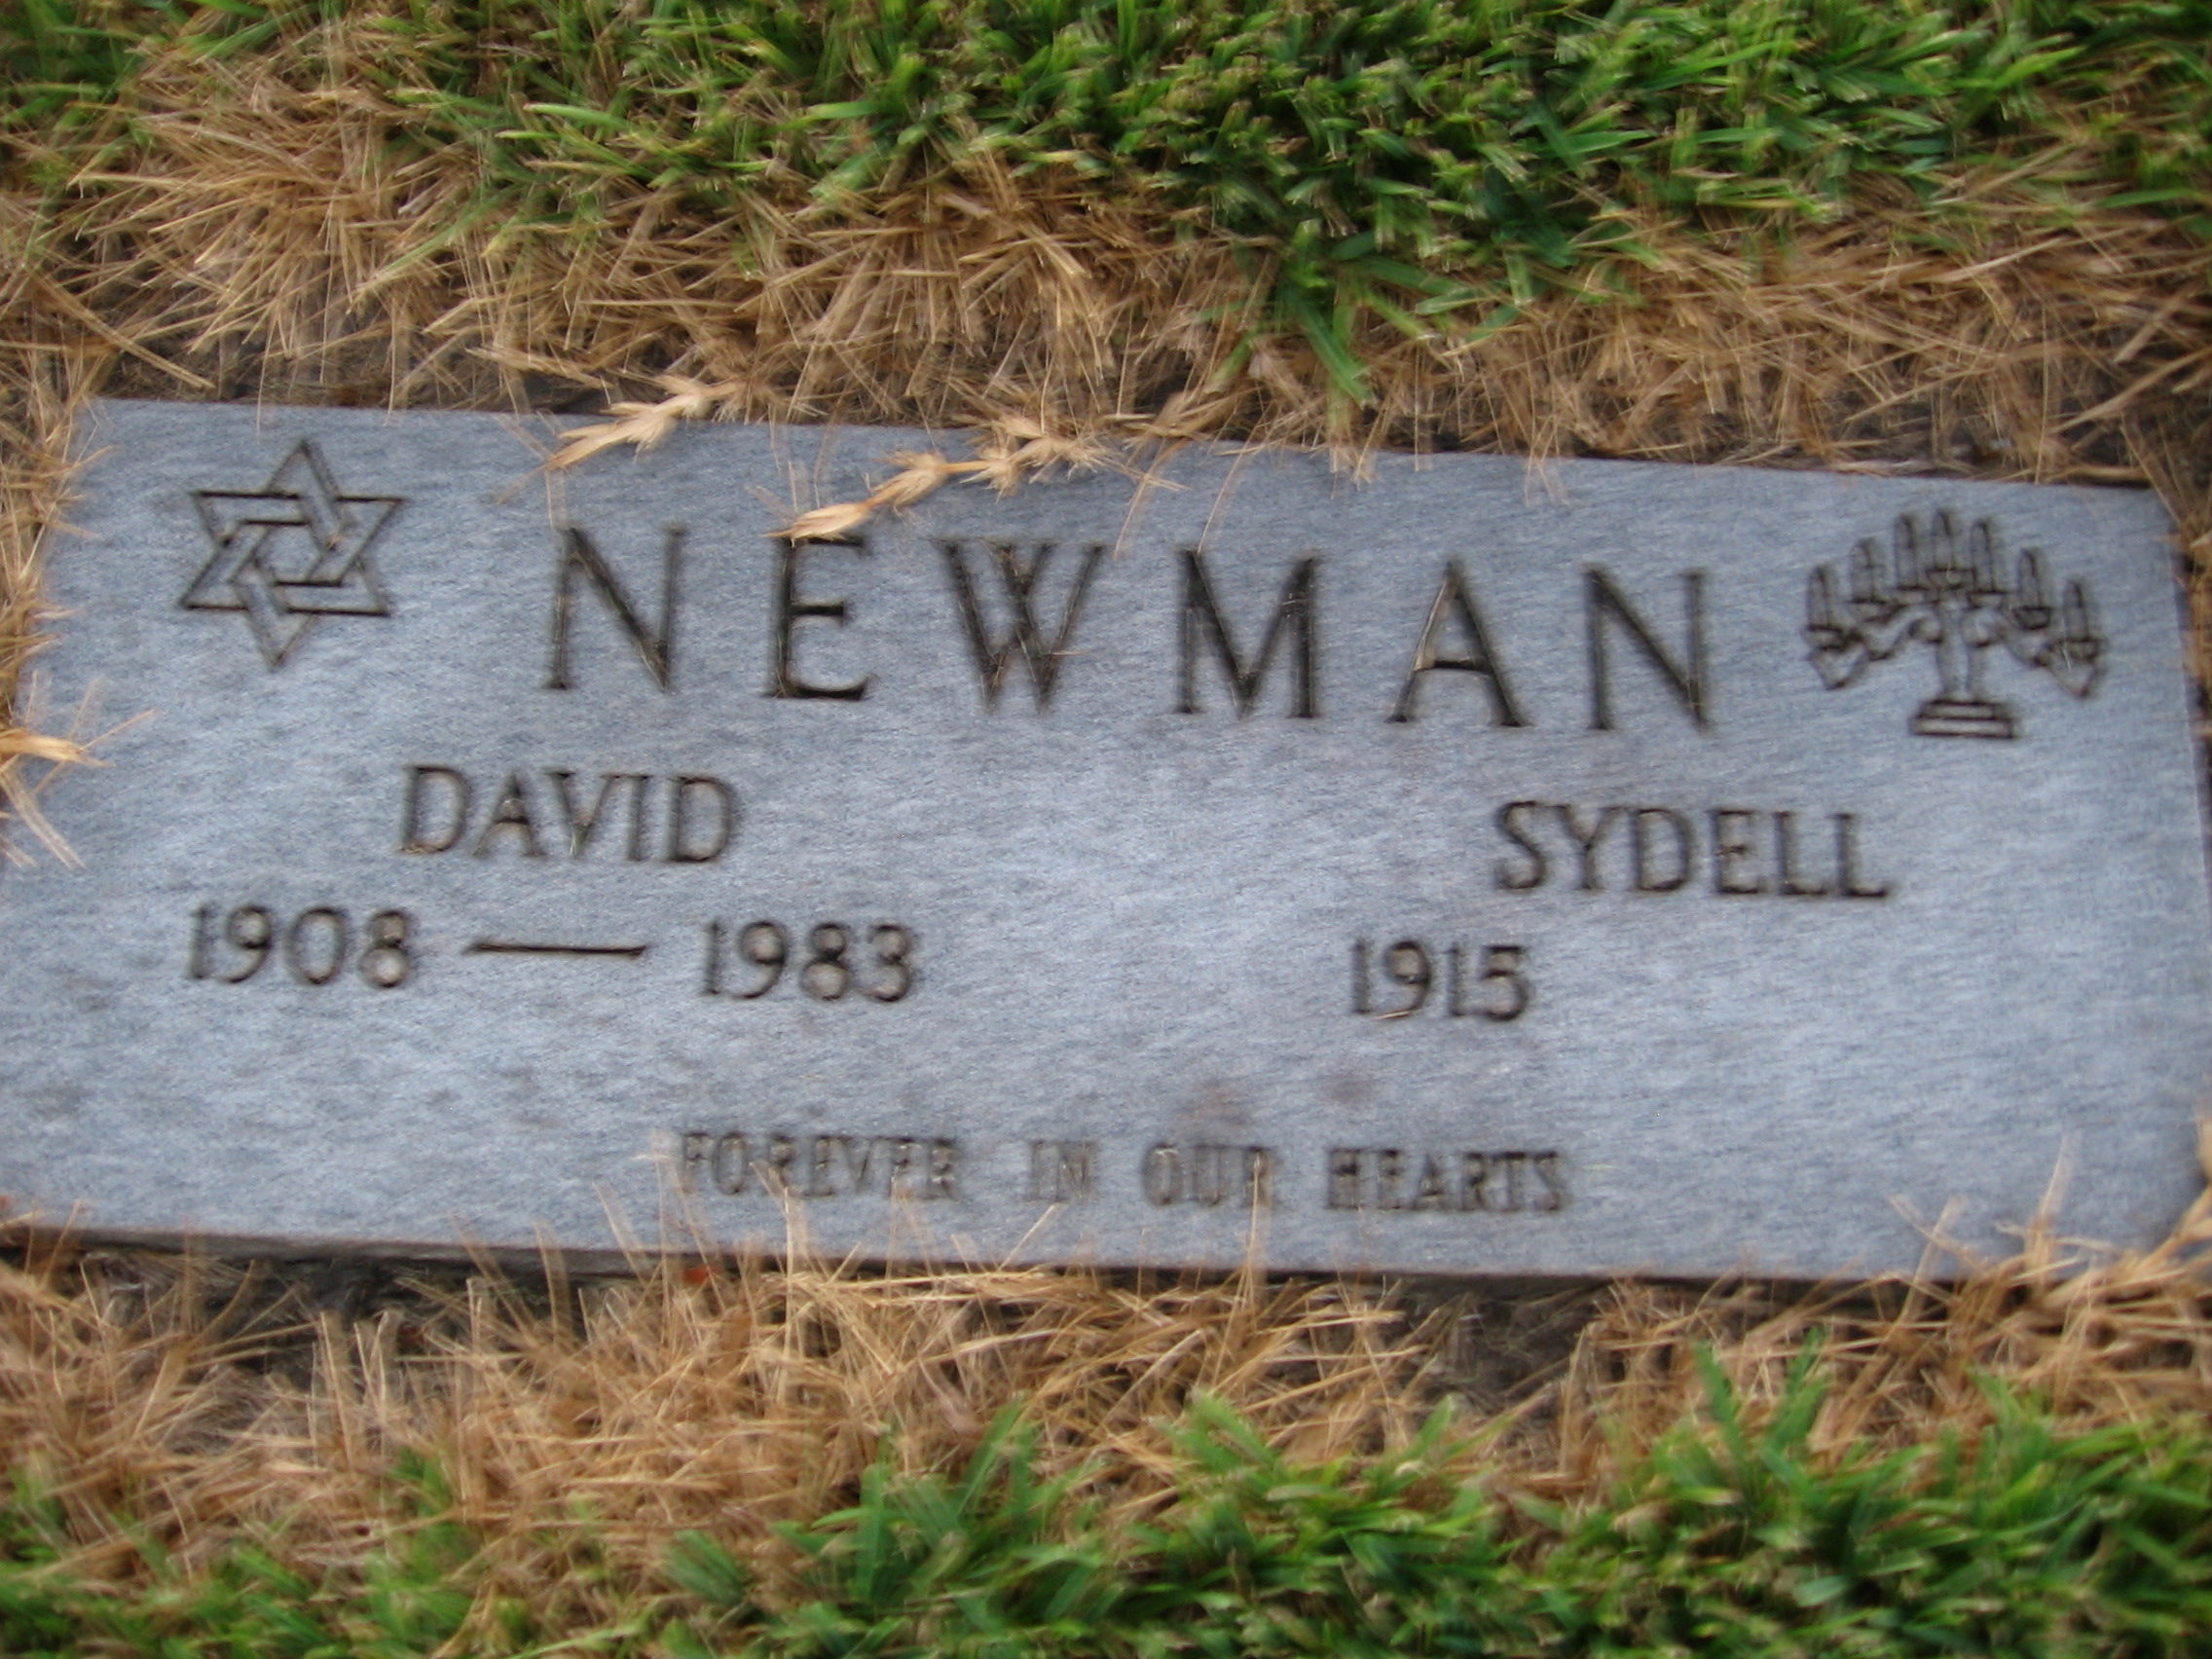 Sydell Newman